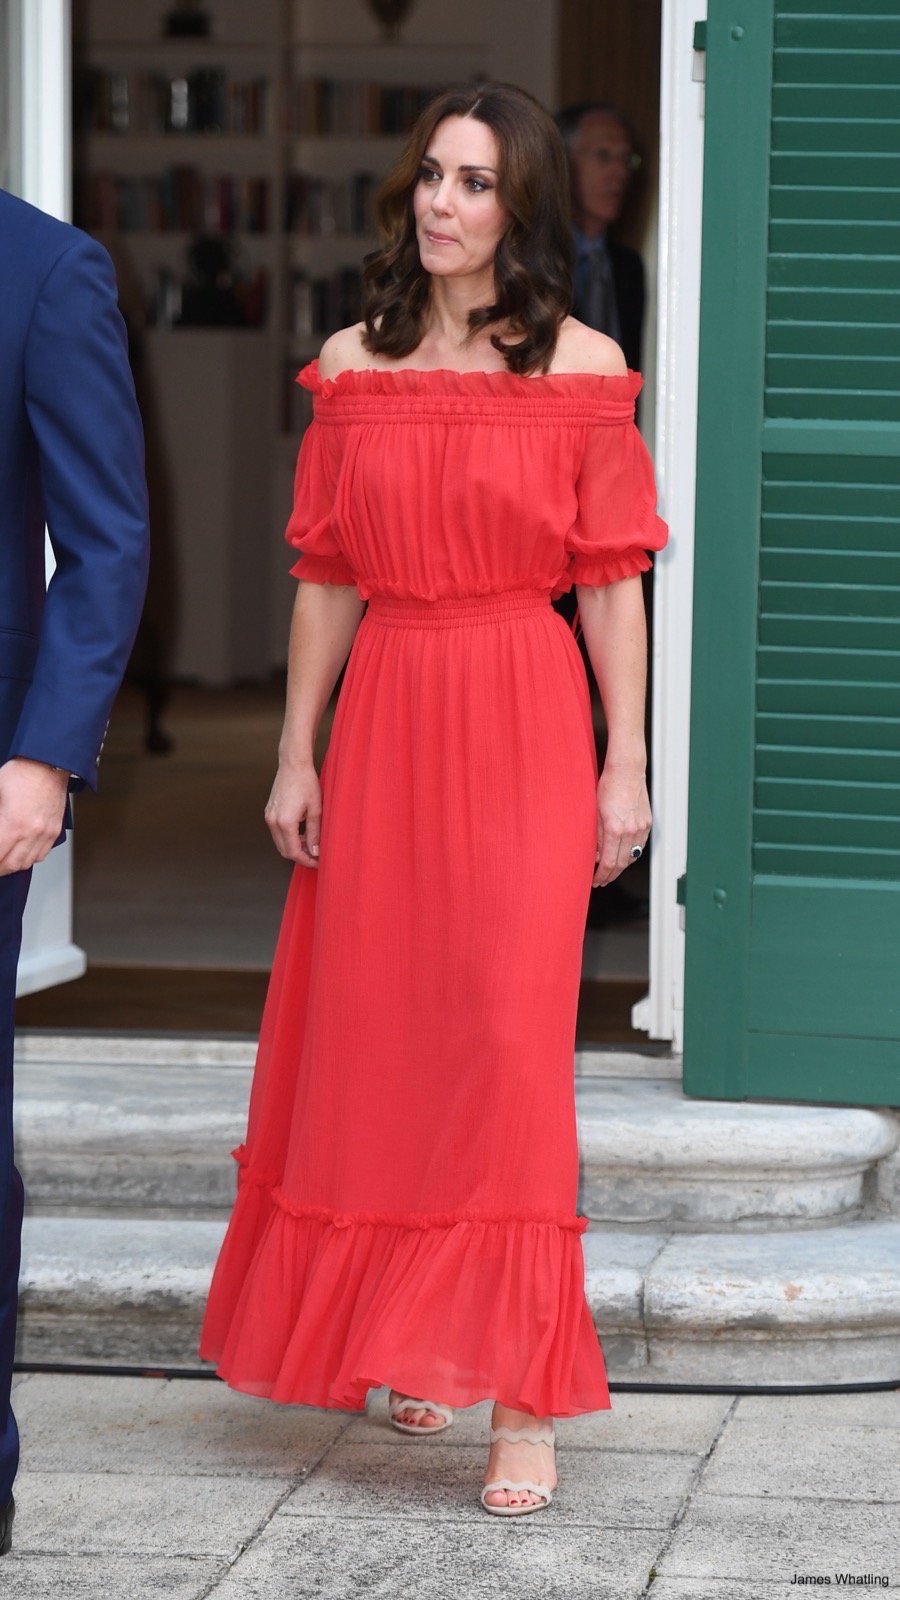 Kate Middleton at a Garden Party wearing Prada sandals with a long red maxi dress. According to our calculations, the Italian company is Kate’s fifth favourite luxury shoe brand.